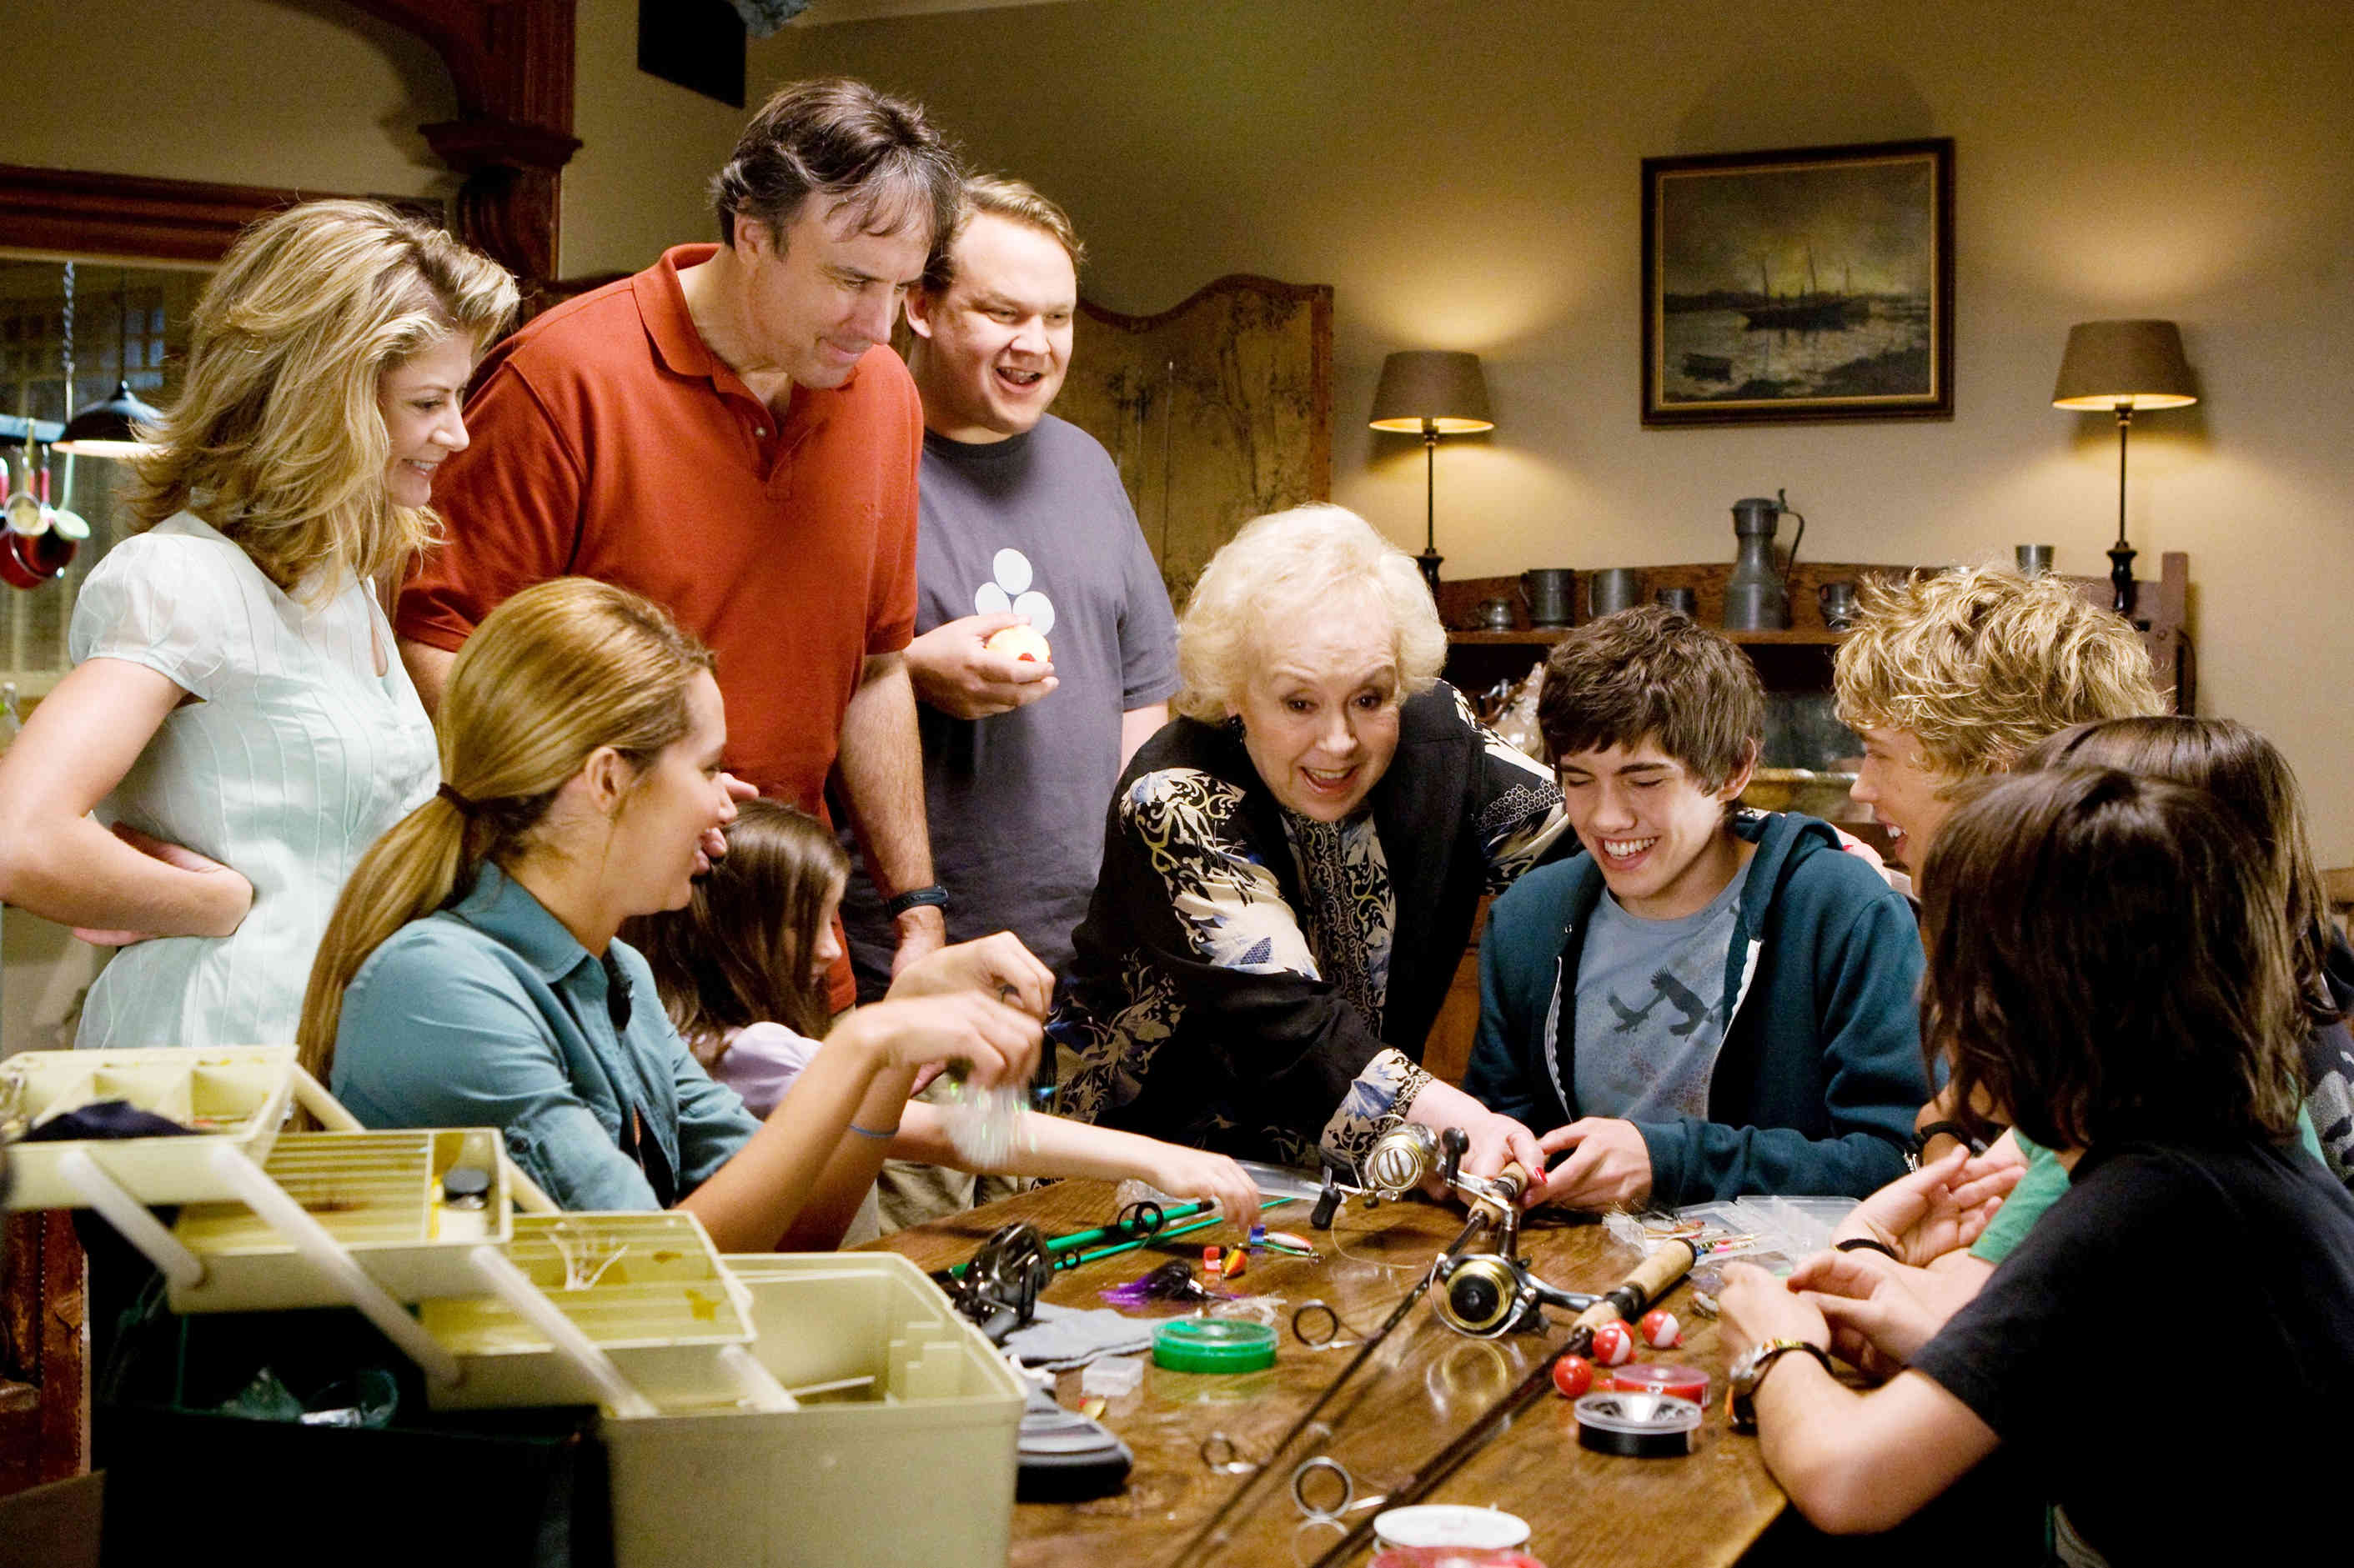 Gillian Vigman, Ashley Tisdale, Ashley Boettcher, Kevin Nealon, Andy Richter, Doris Roberts, Carter Jenkins, Austin Butler, Regan Young and Henri Young in The 20th Century Fox's Aliens in the Attic (2009)